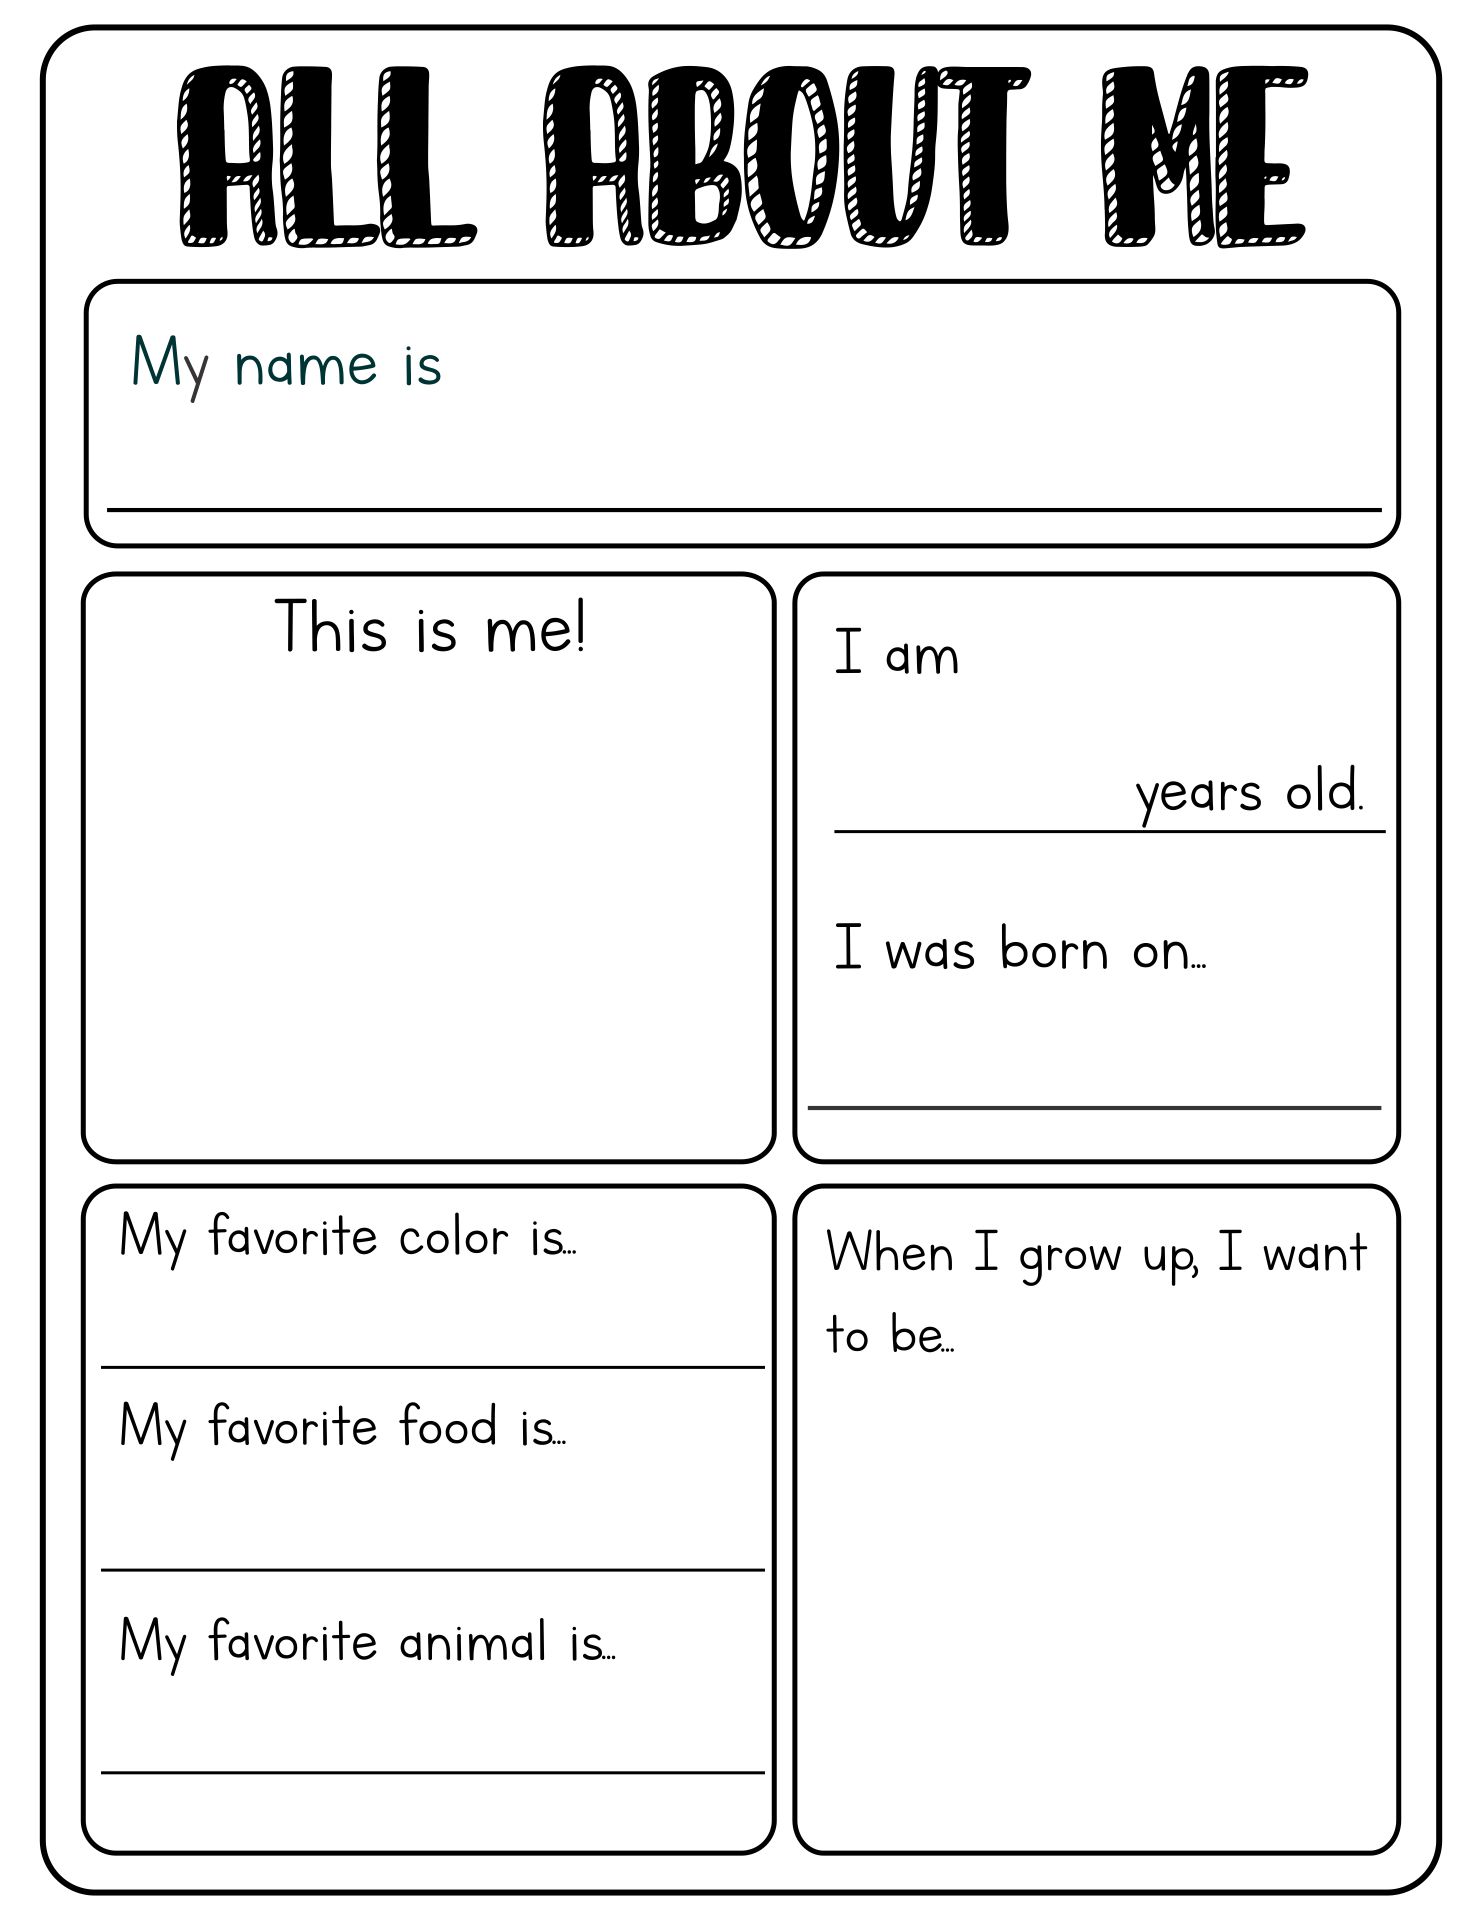 all-about-me-for-teens-printable